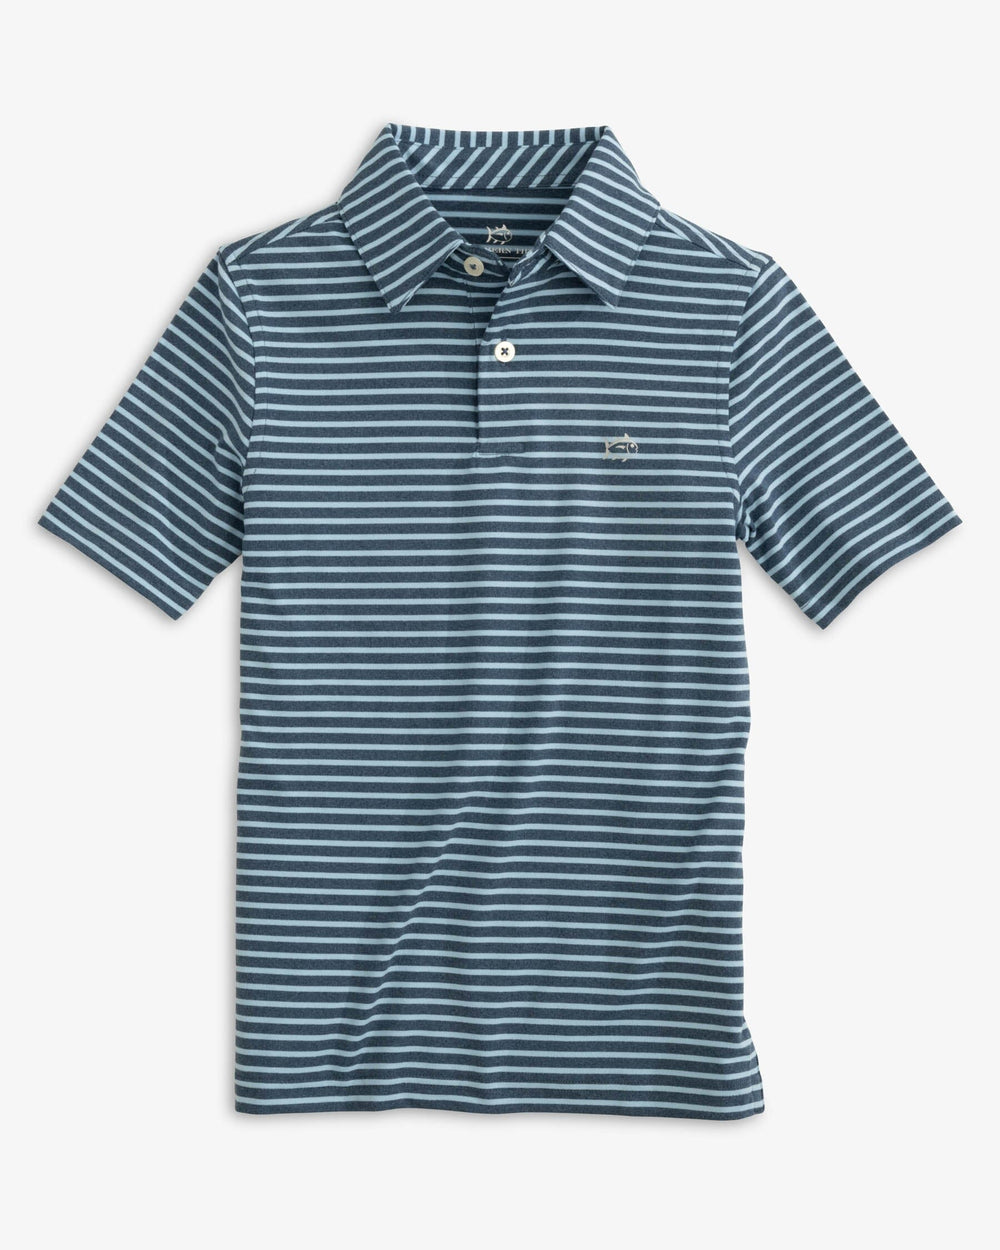 The front view of the Southern Tide Boys Ryder Heather Marin Stripe Performance Polo Shirt by Southern Tide - Heather Aged Denim